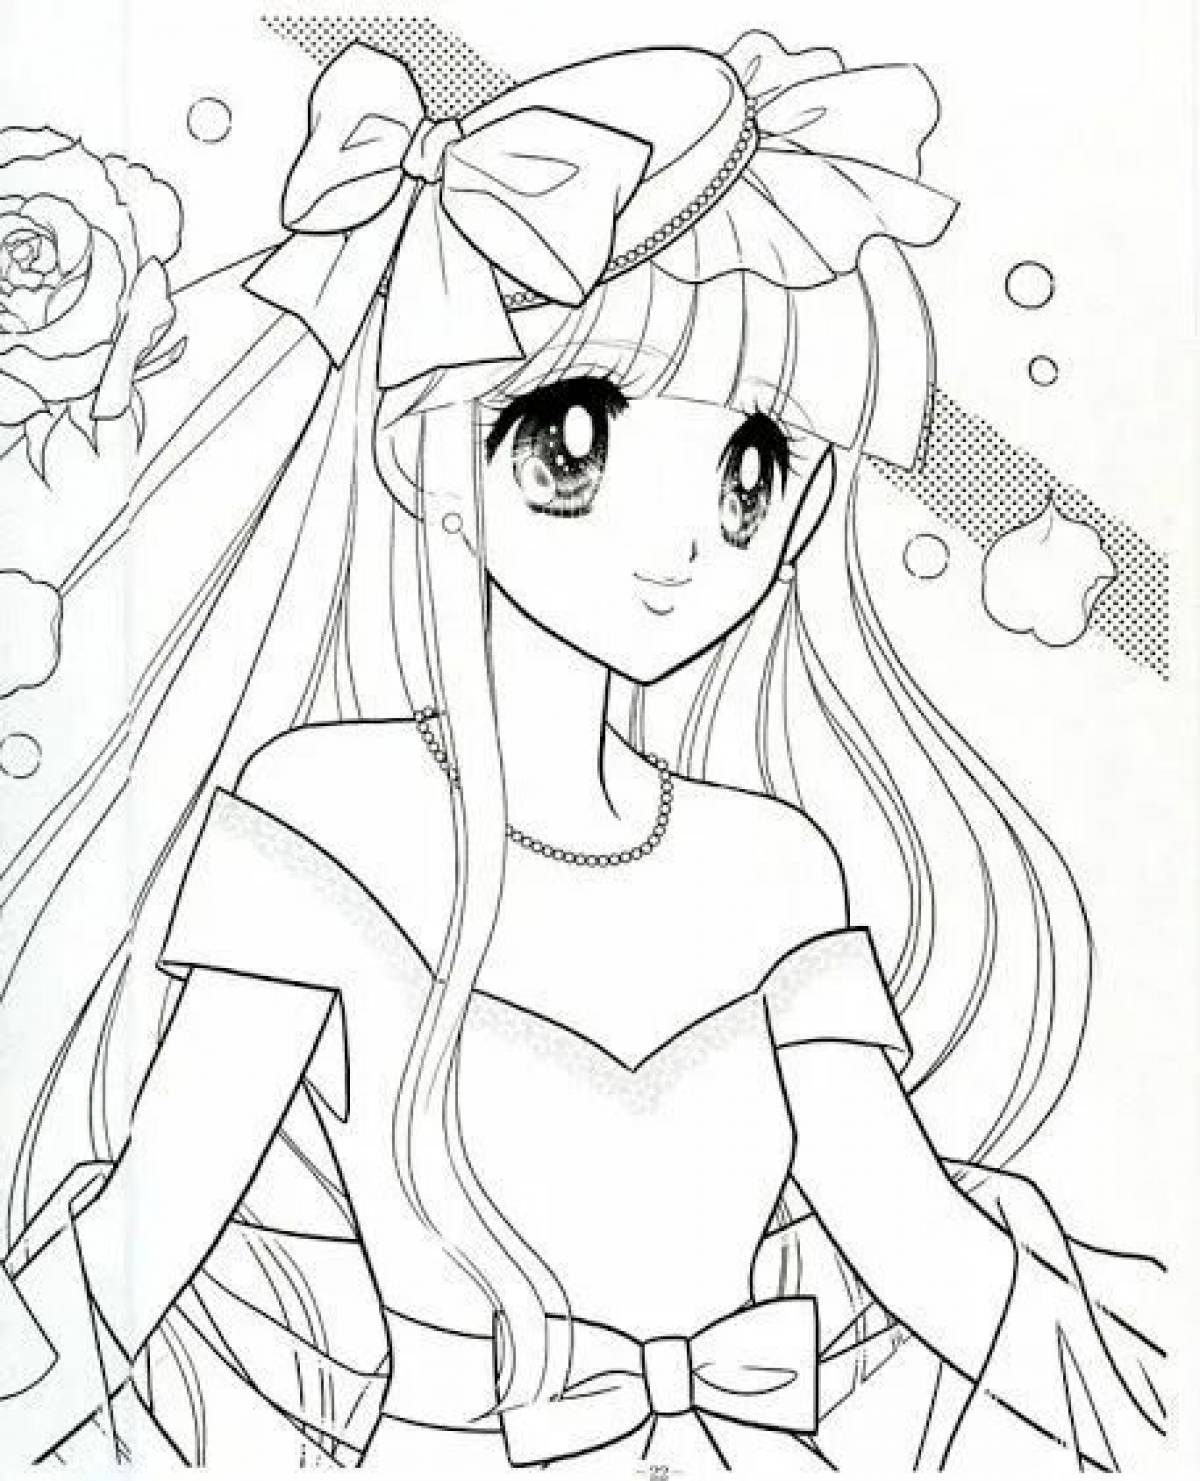 Luxury 18 years old anime coloring book